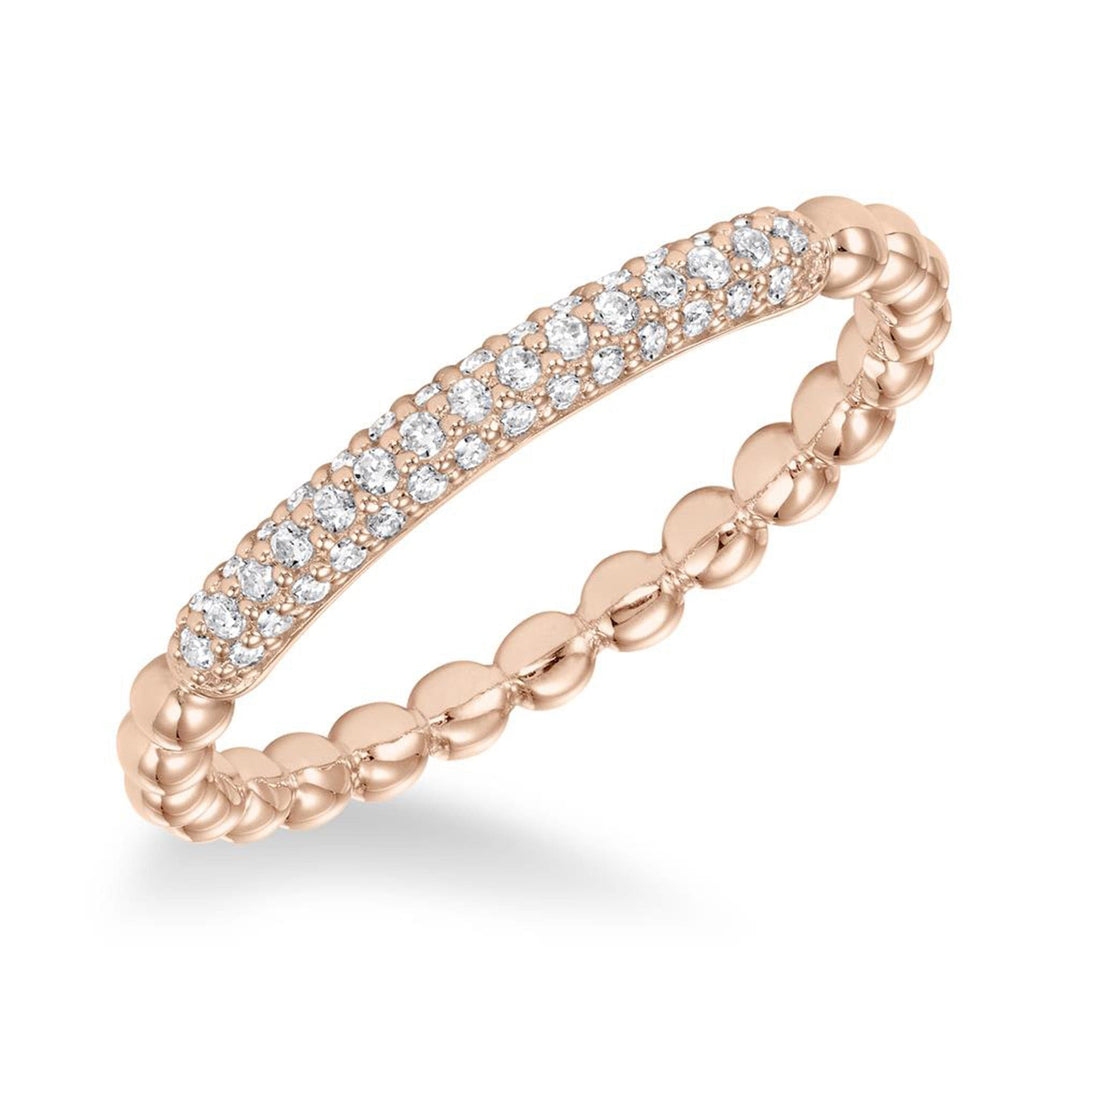 Pave Diamond Beaded Rose Gold Band Ring by Frederick Goldman